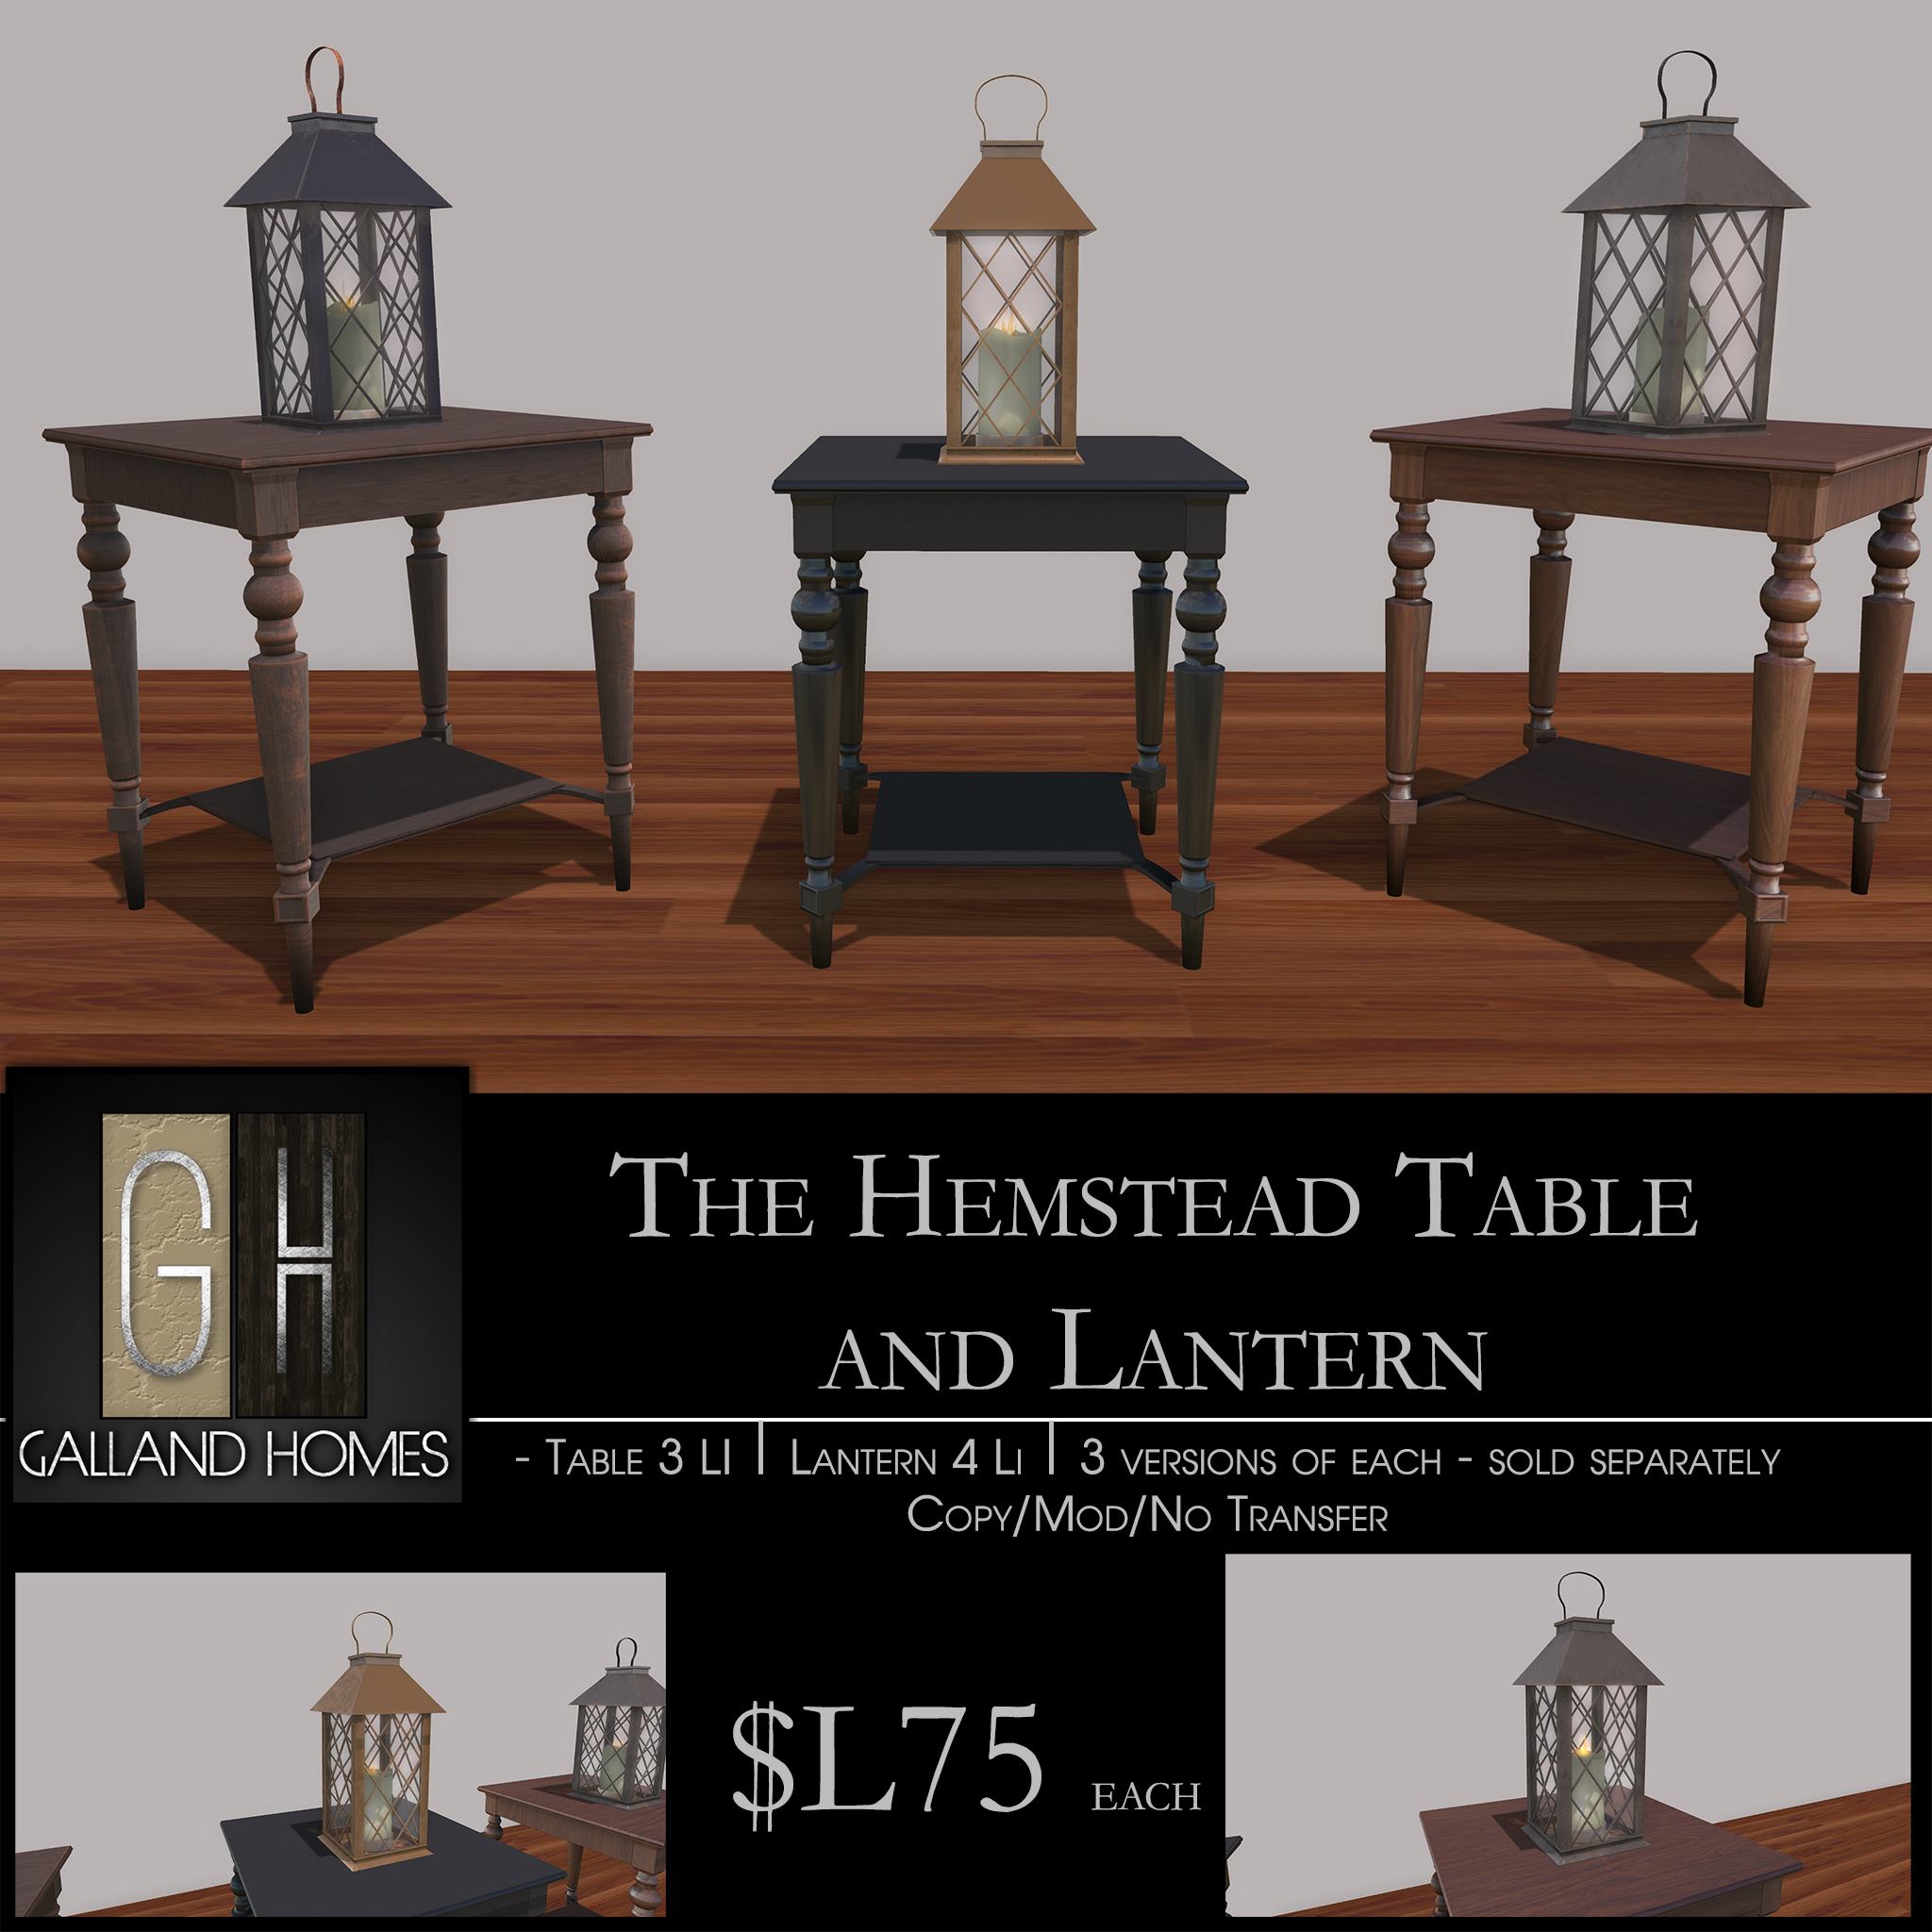 Galland Homes – The Hemstead Table And Lantern